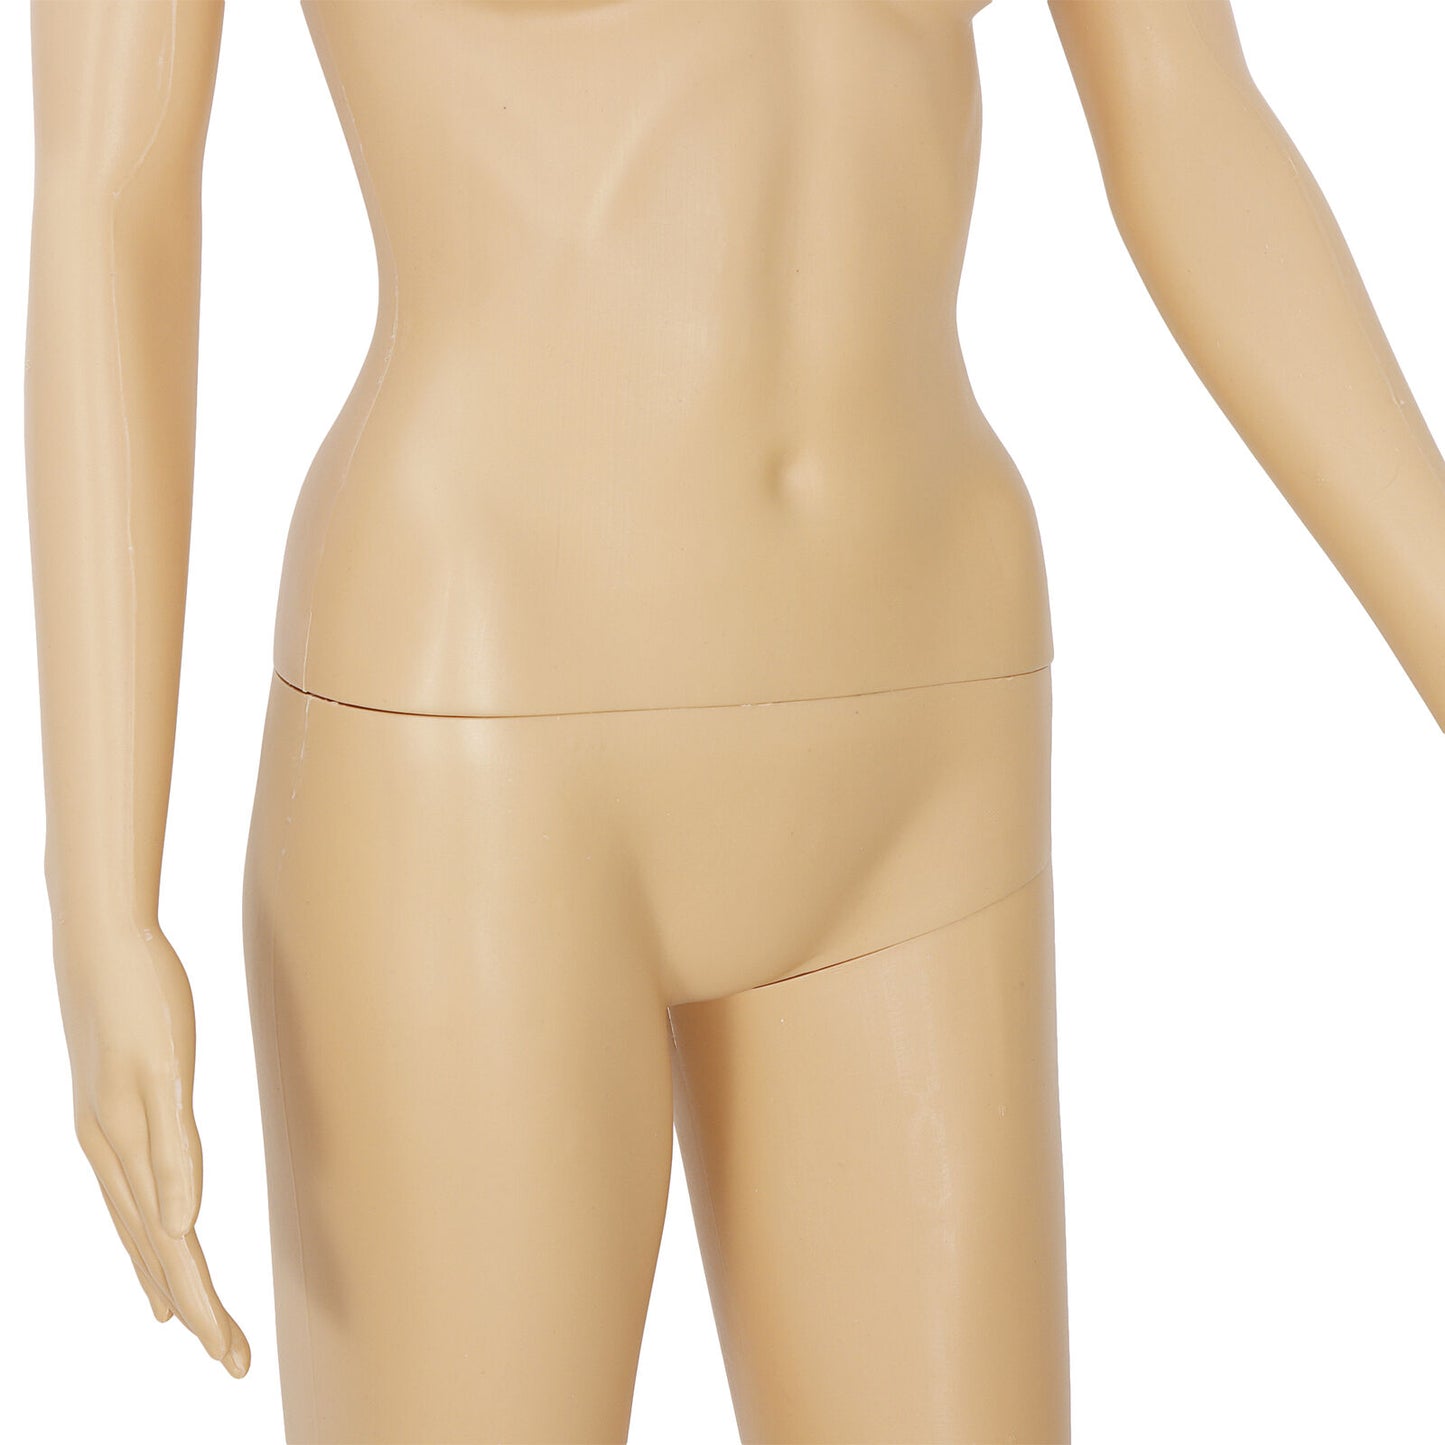 PP Realistic Display Head Turns Dress Form with Base Female Mannequin Full Body